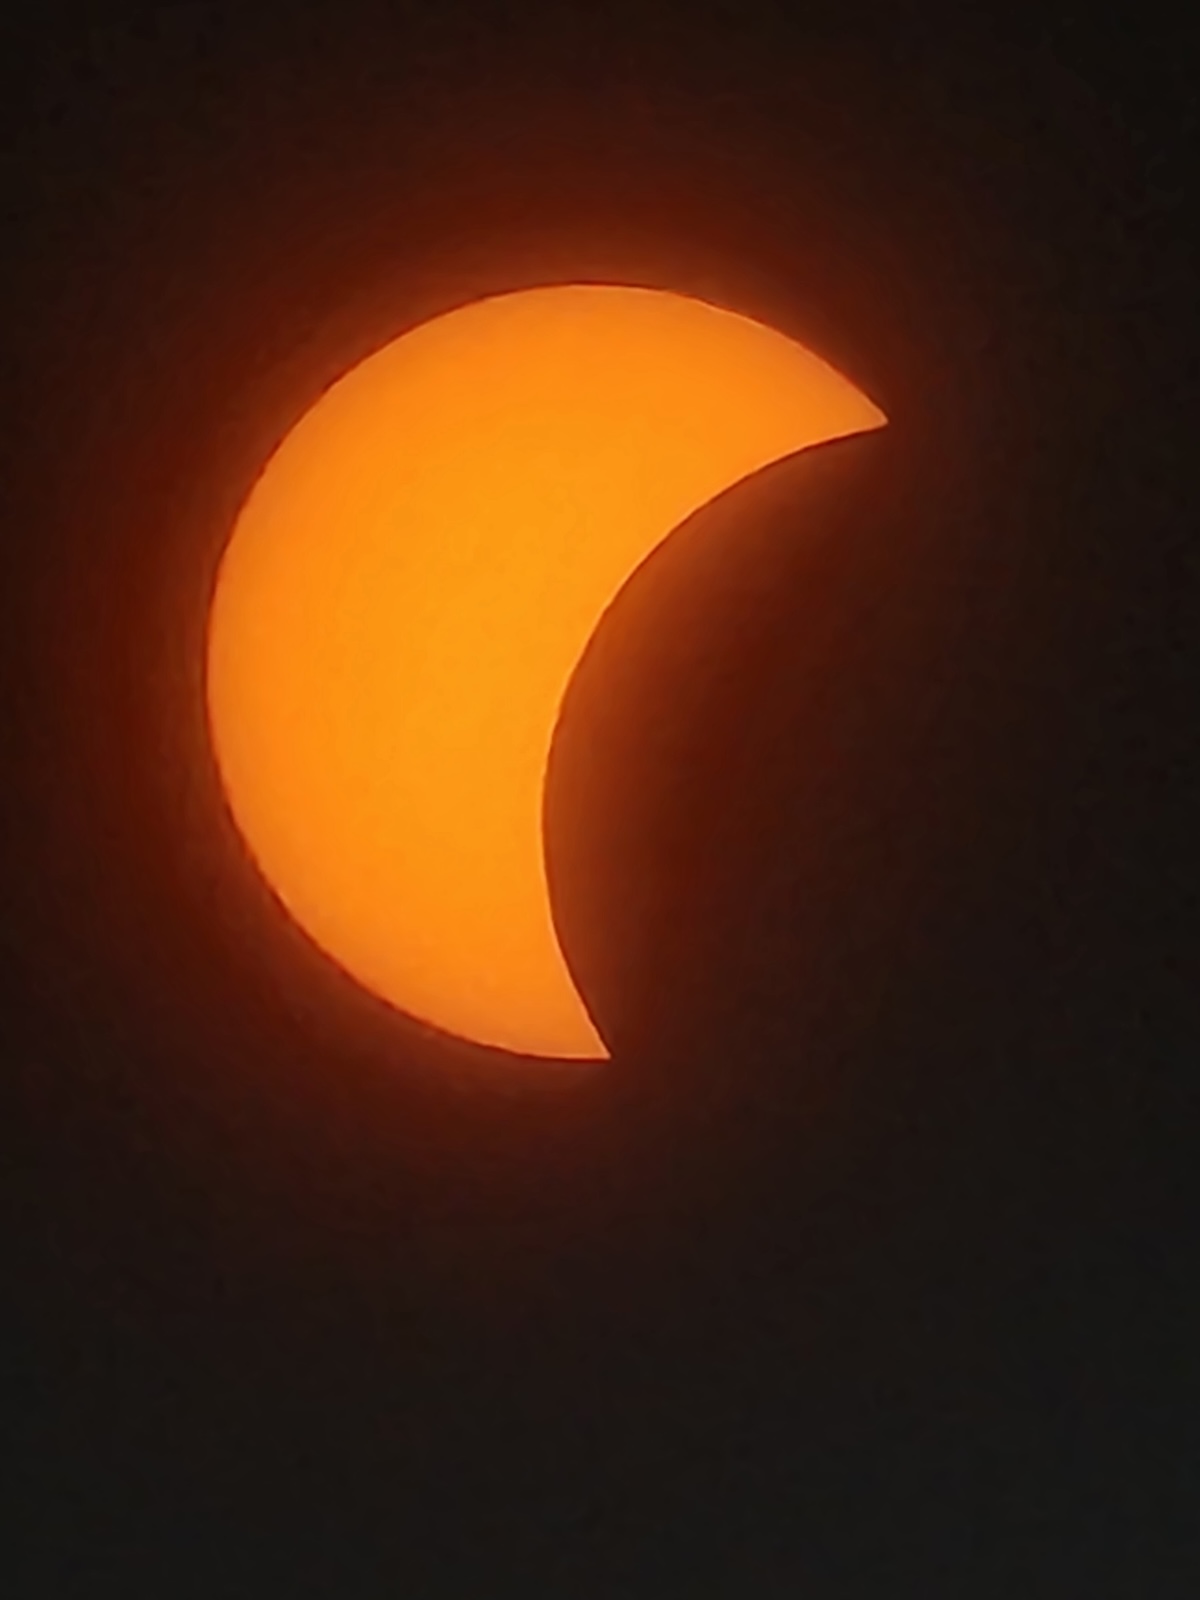 Solar eclipse photographed from Ocala